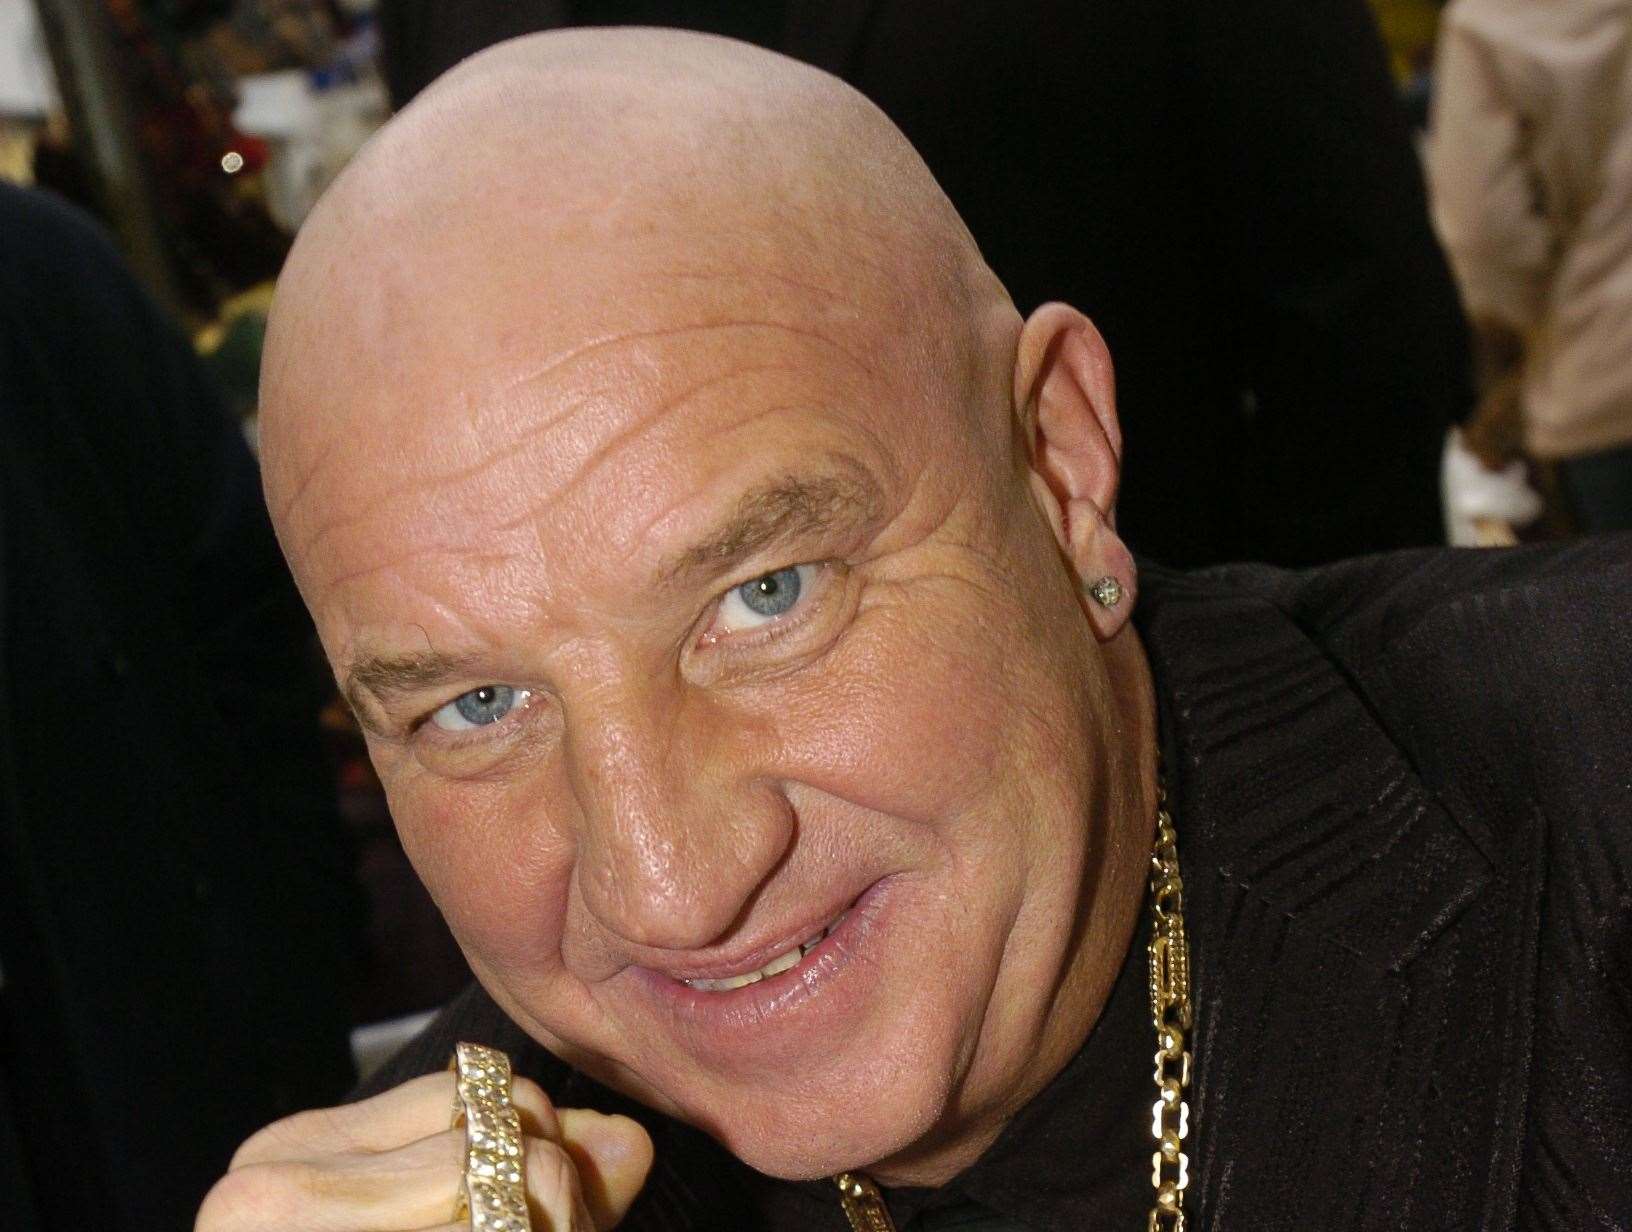 An inquest has been opened into the death of Dave Courtney